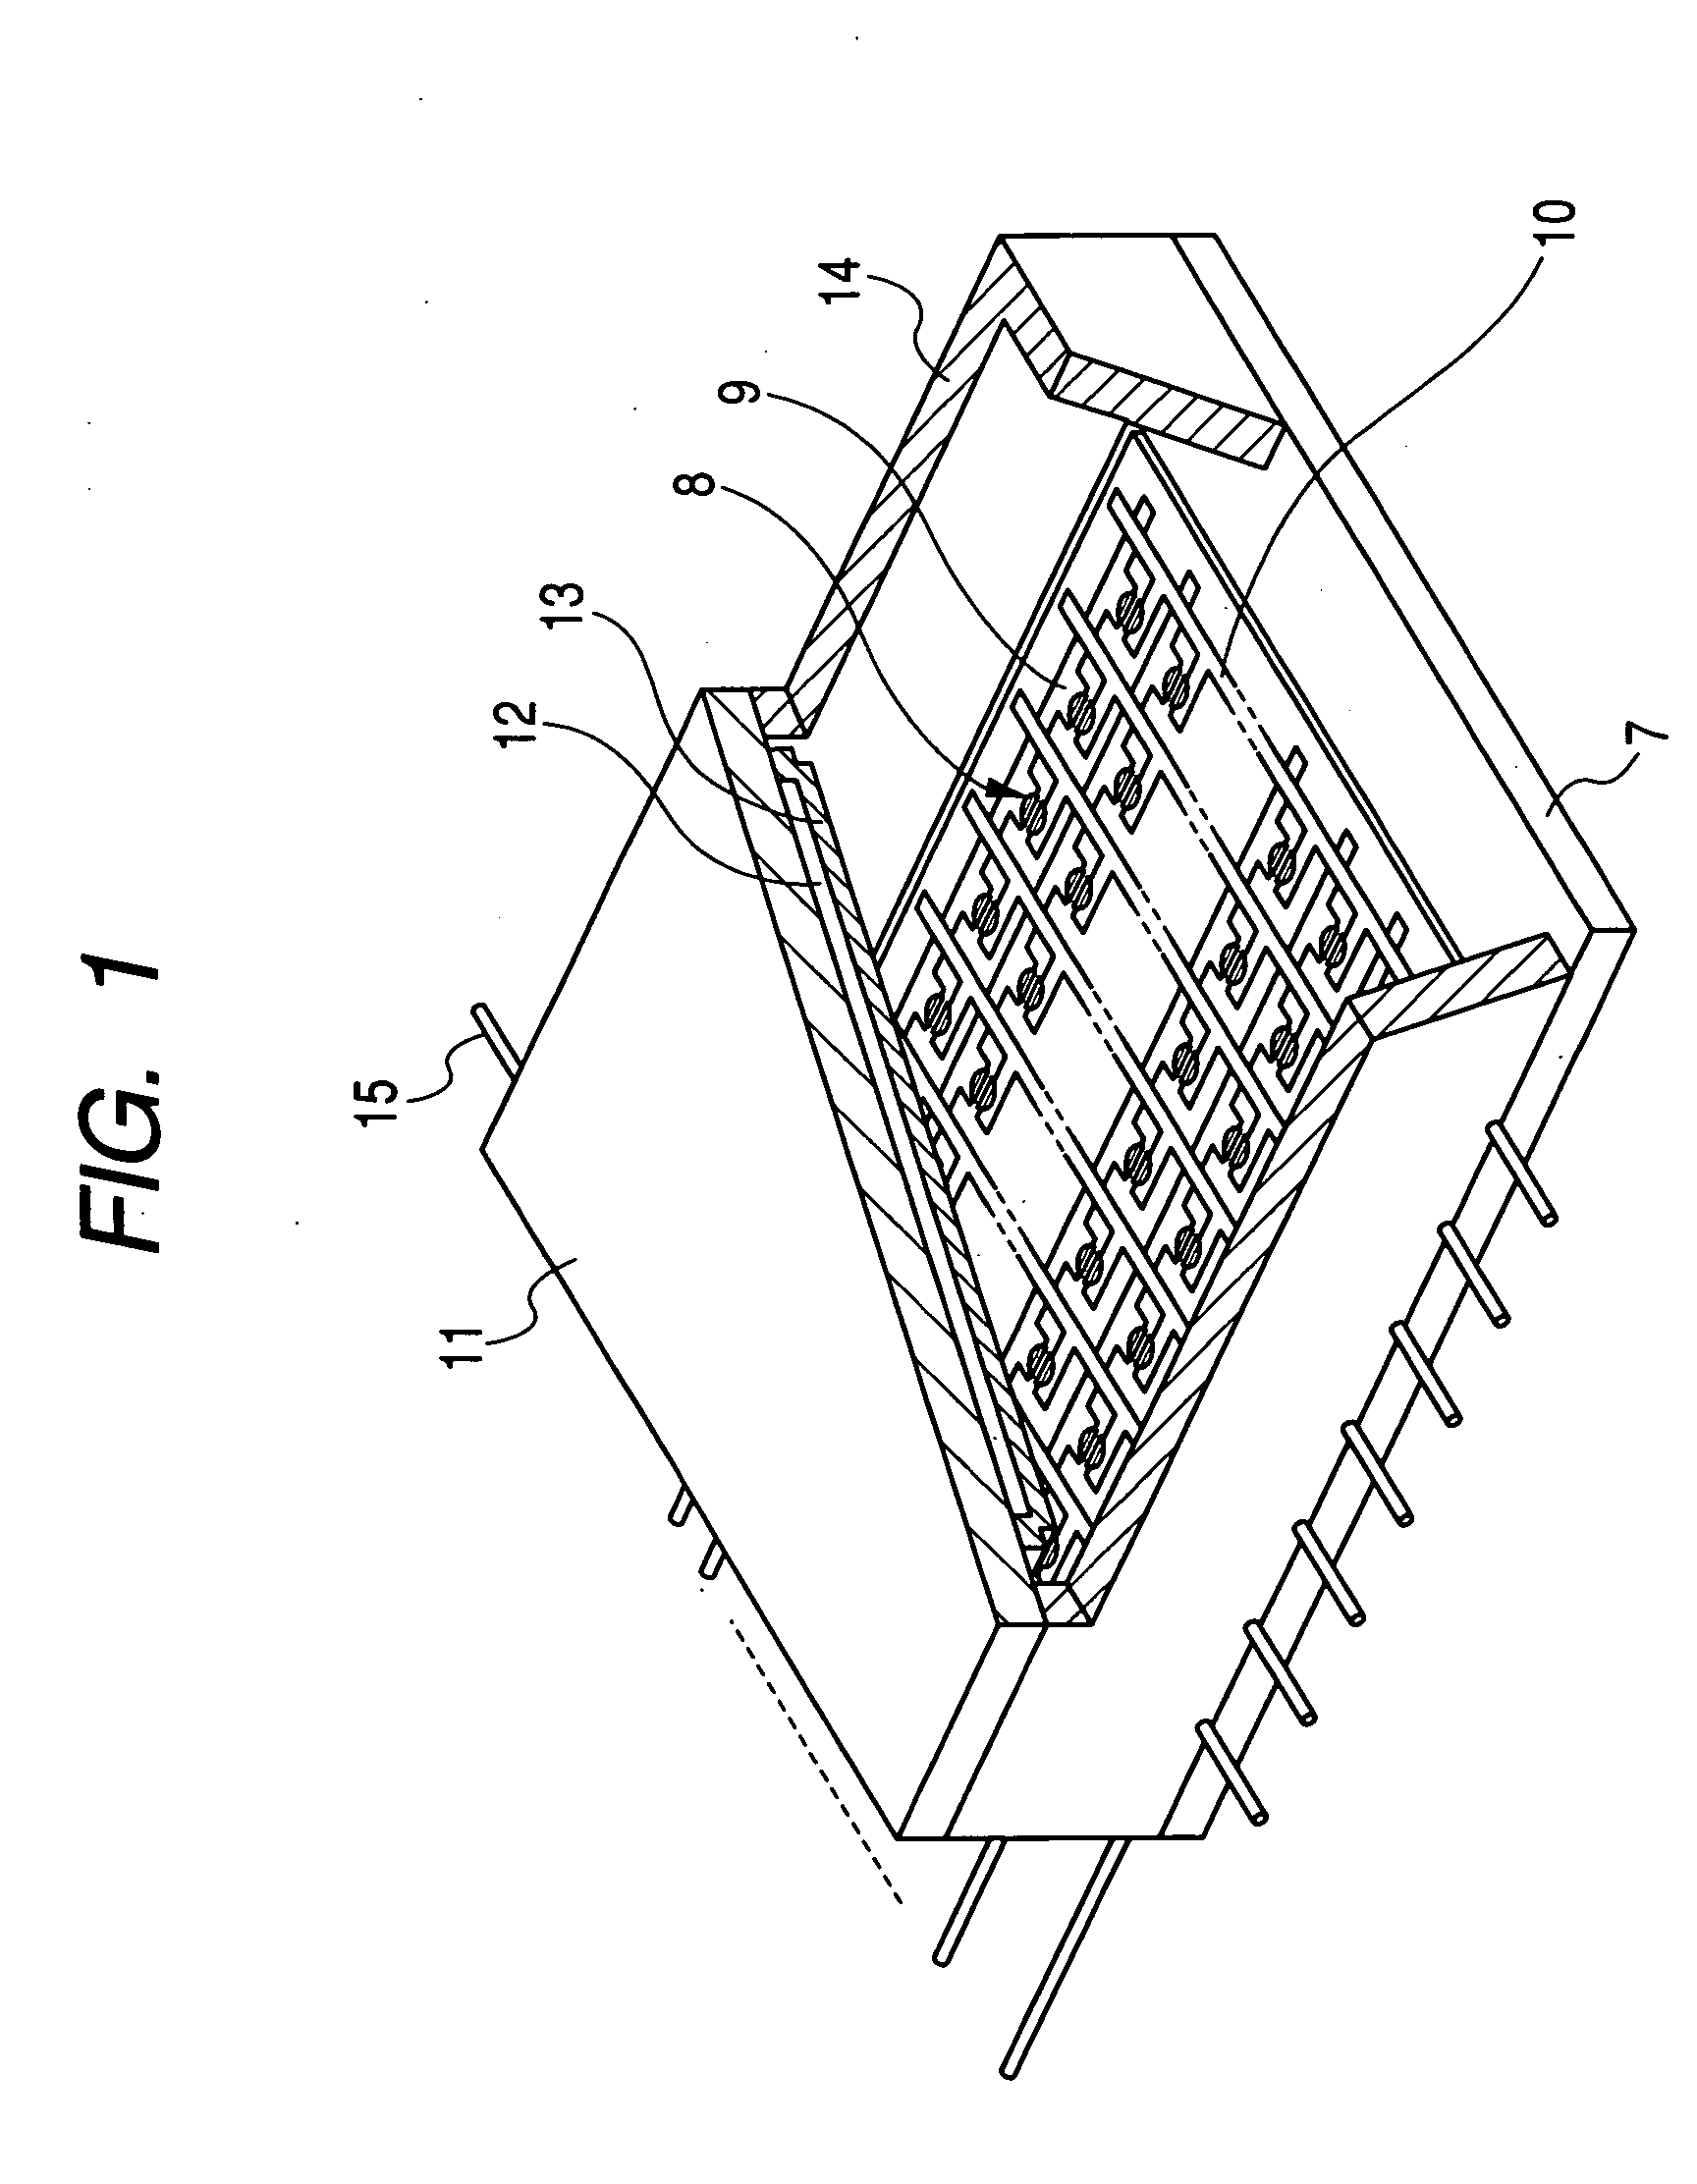 Image display apparatus and method for manufacturing the same